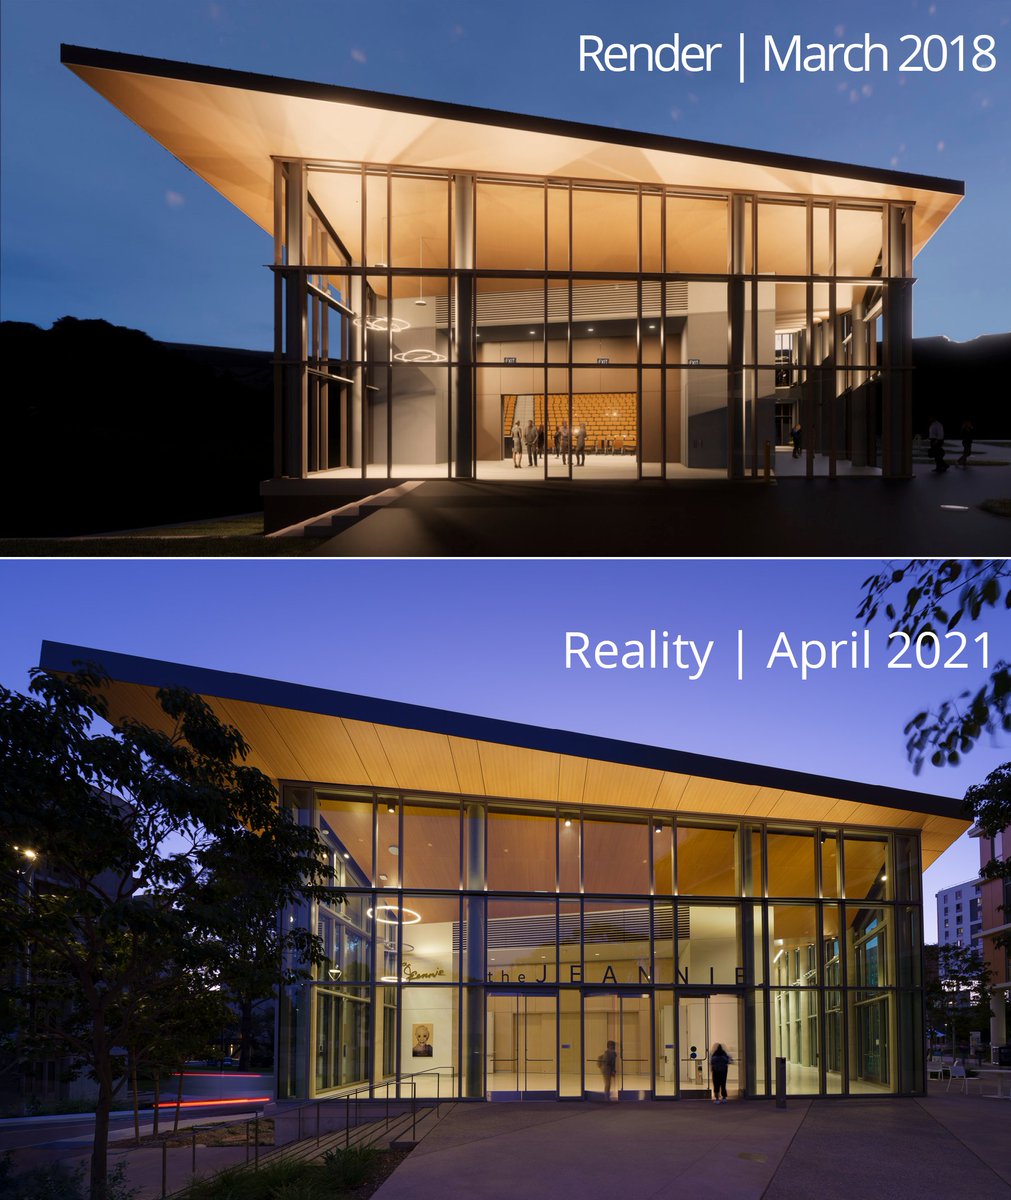 Render vs Reality | The Jeannie 
#UCSD #theJeannie #rendervsreality #SRAacademic